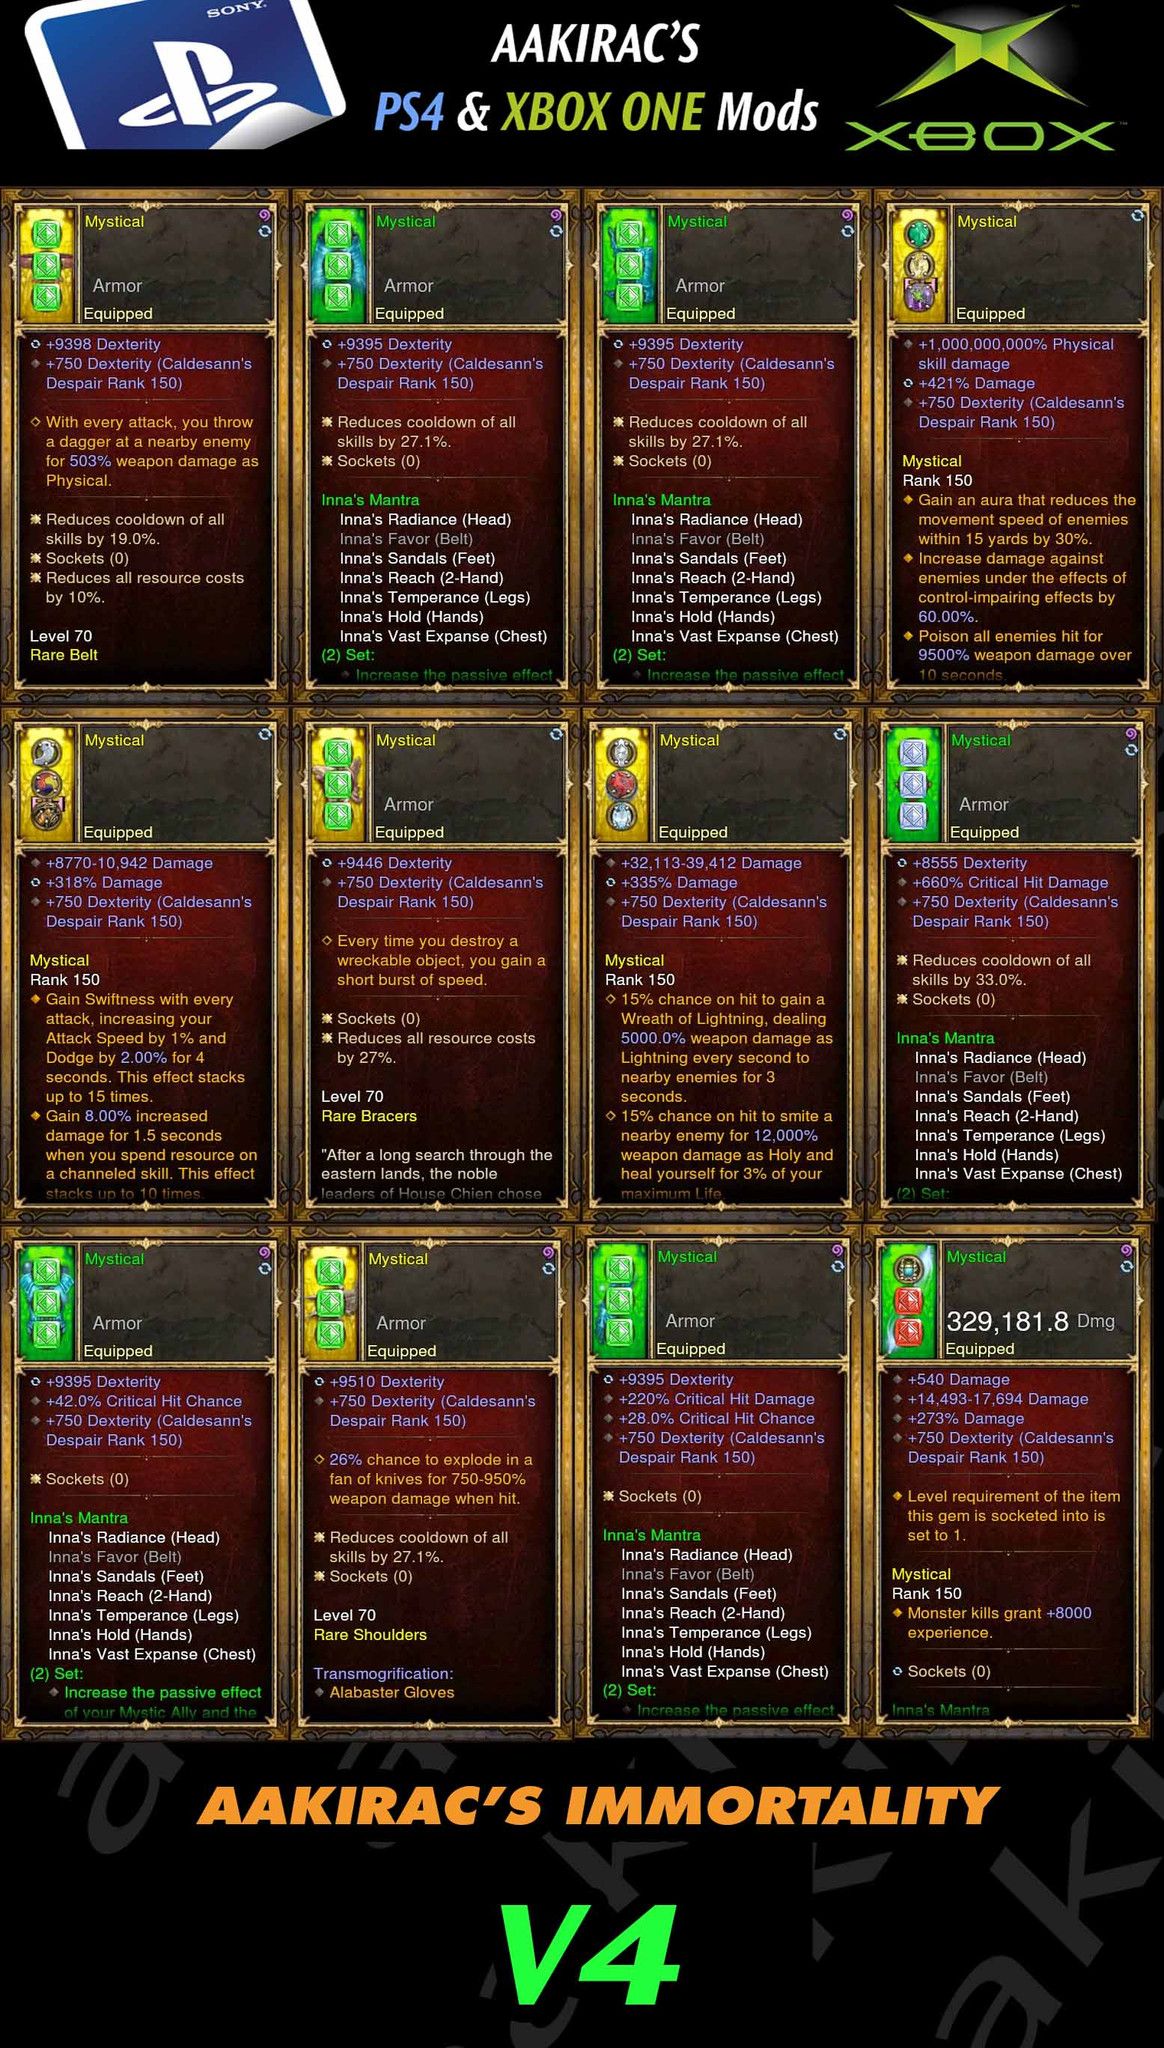 Diablo 3 Immortal v4 Inna's Monk Modded Set for Rift 150 Mystical Diablo 3 Mods ROS Seasonal and Non Seasonal Save Mod - Modded Items and Gear - Hacks - Cheats - Trainers for Playstation 4 - Playstation 5 - Nintendo Switch - Xbox One